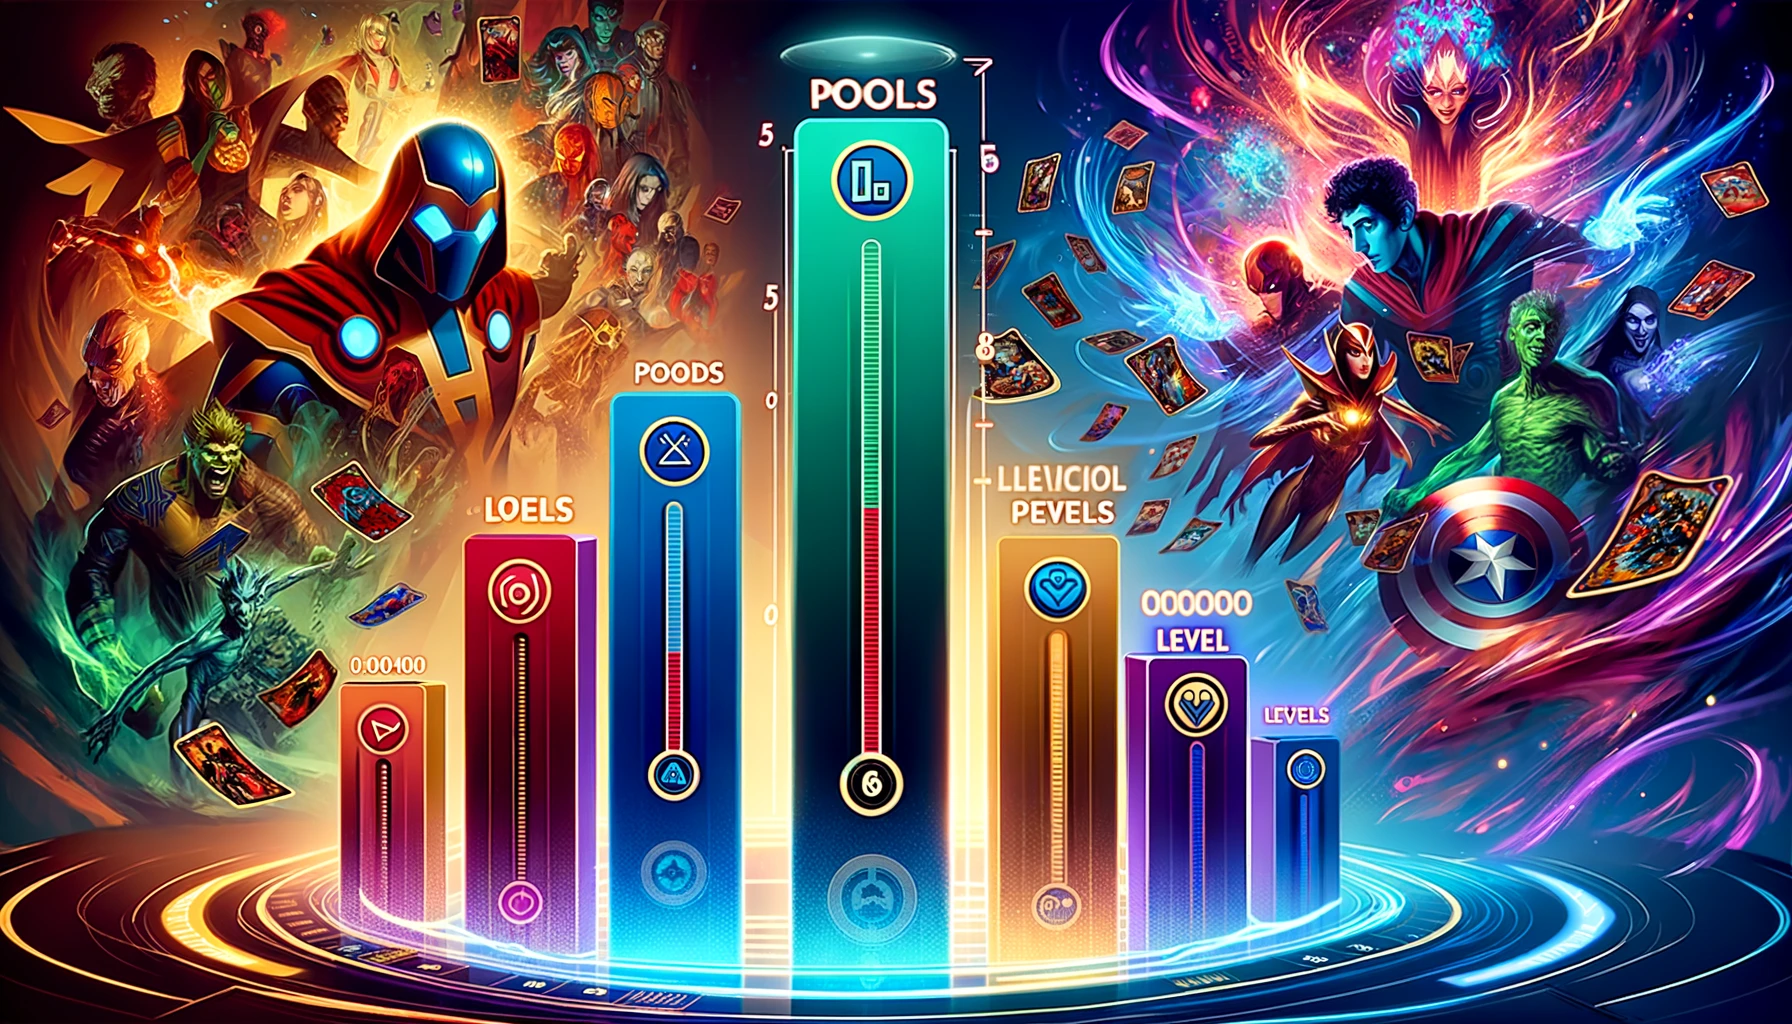 Wide-format illustration depicting the concept of card pools in Marvel Snap, featuring a stylized vertical level scale with icons and symbols representing different card pools at various levels, set against a dynamic and colorful background with Marvel characters and vibrant energy effects.